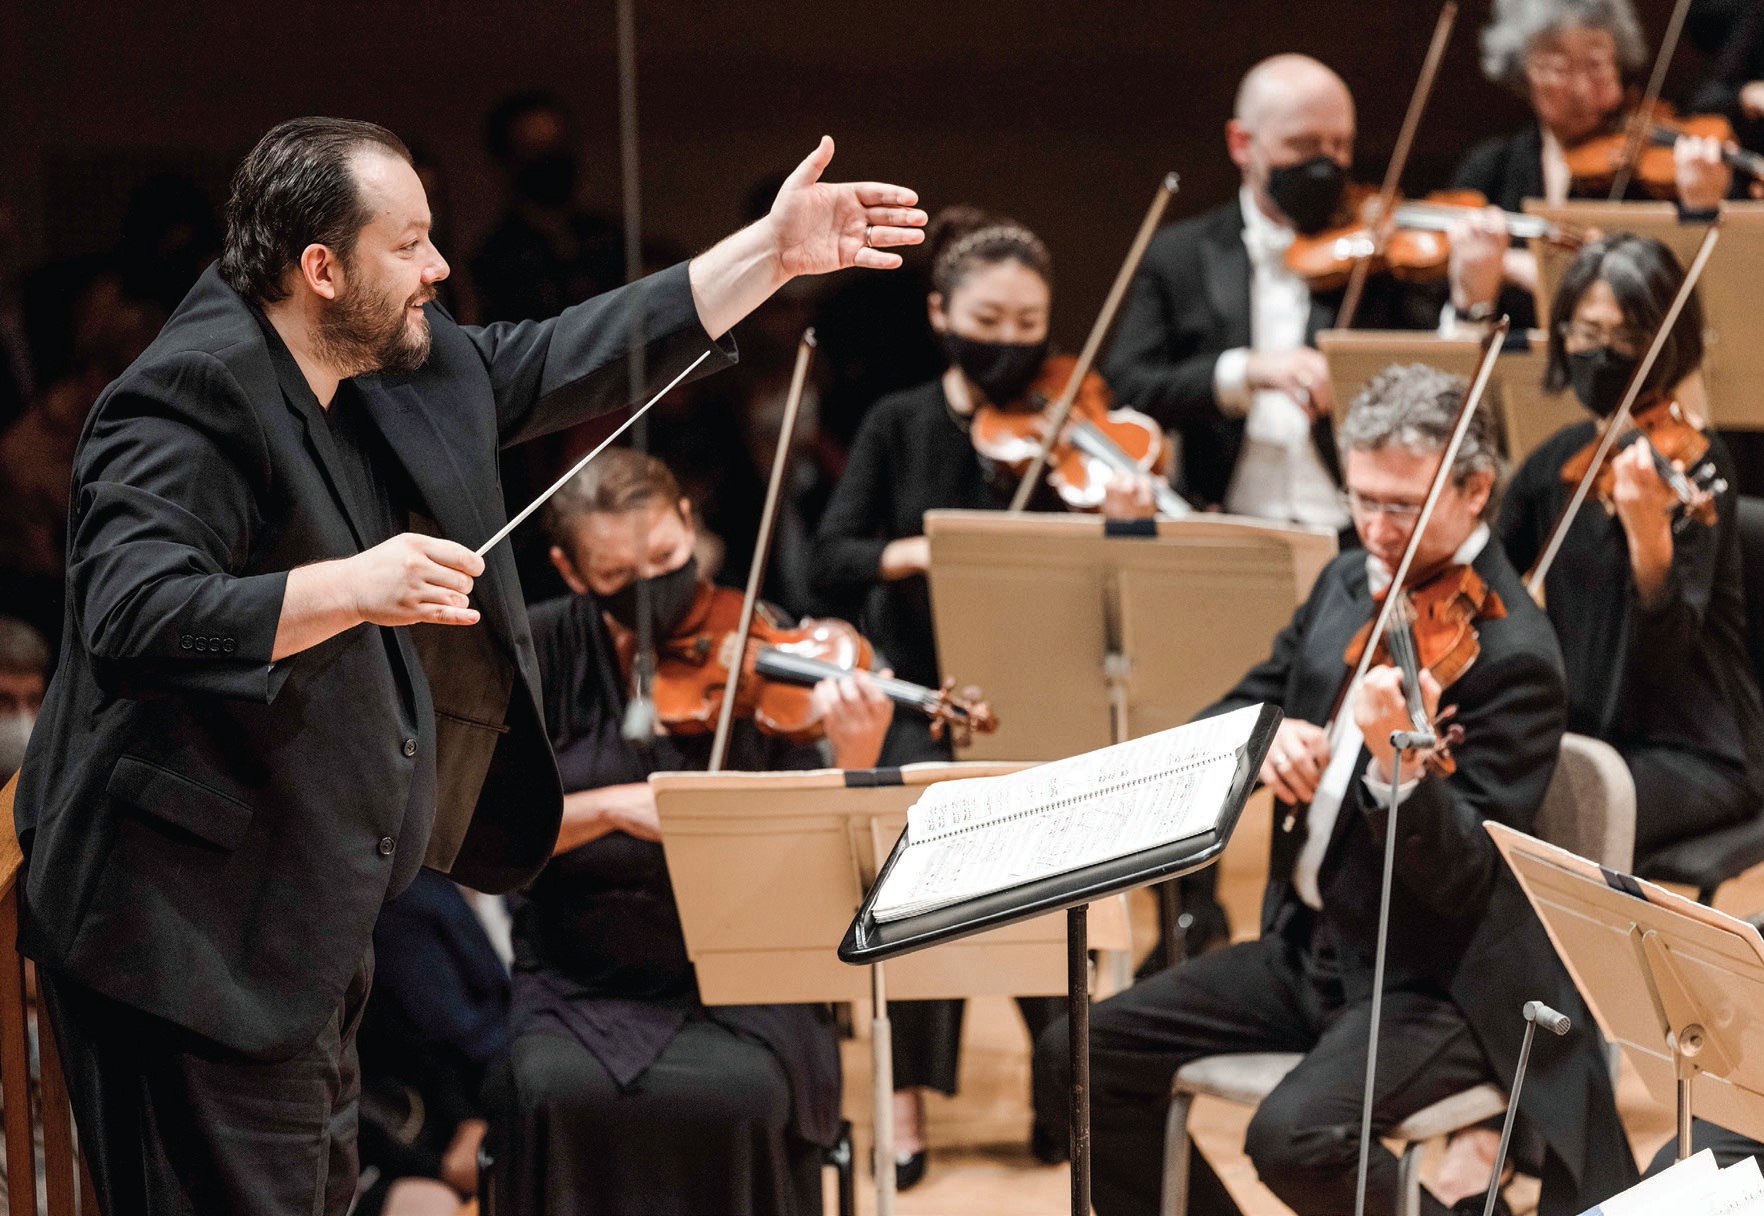 Watch as Latvian conductor Andris Nelsons leads the orchestra in “Scherben der Stille.” PHOTO BY ARAM BOGHOSIAN